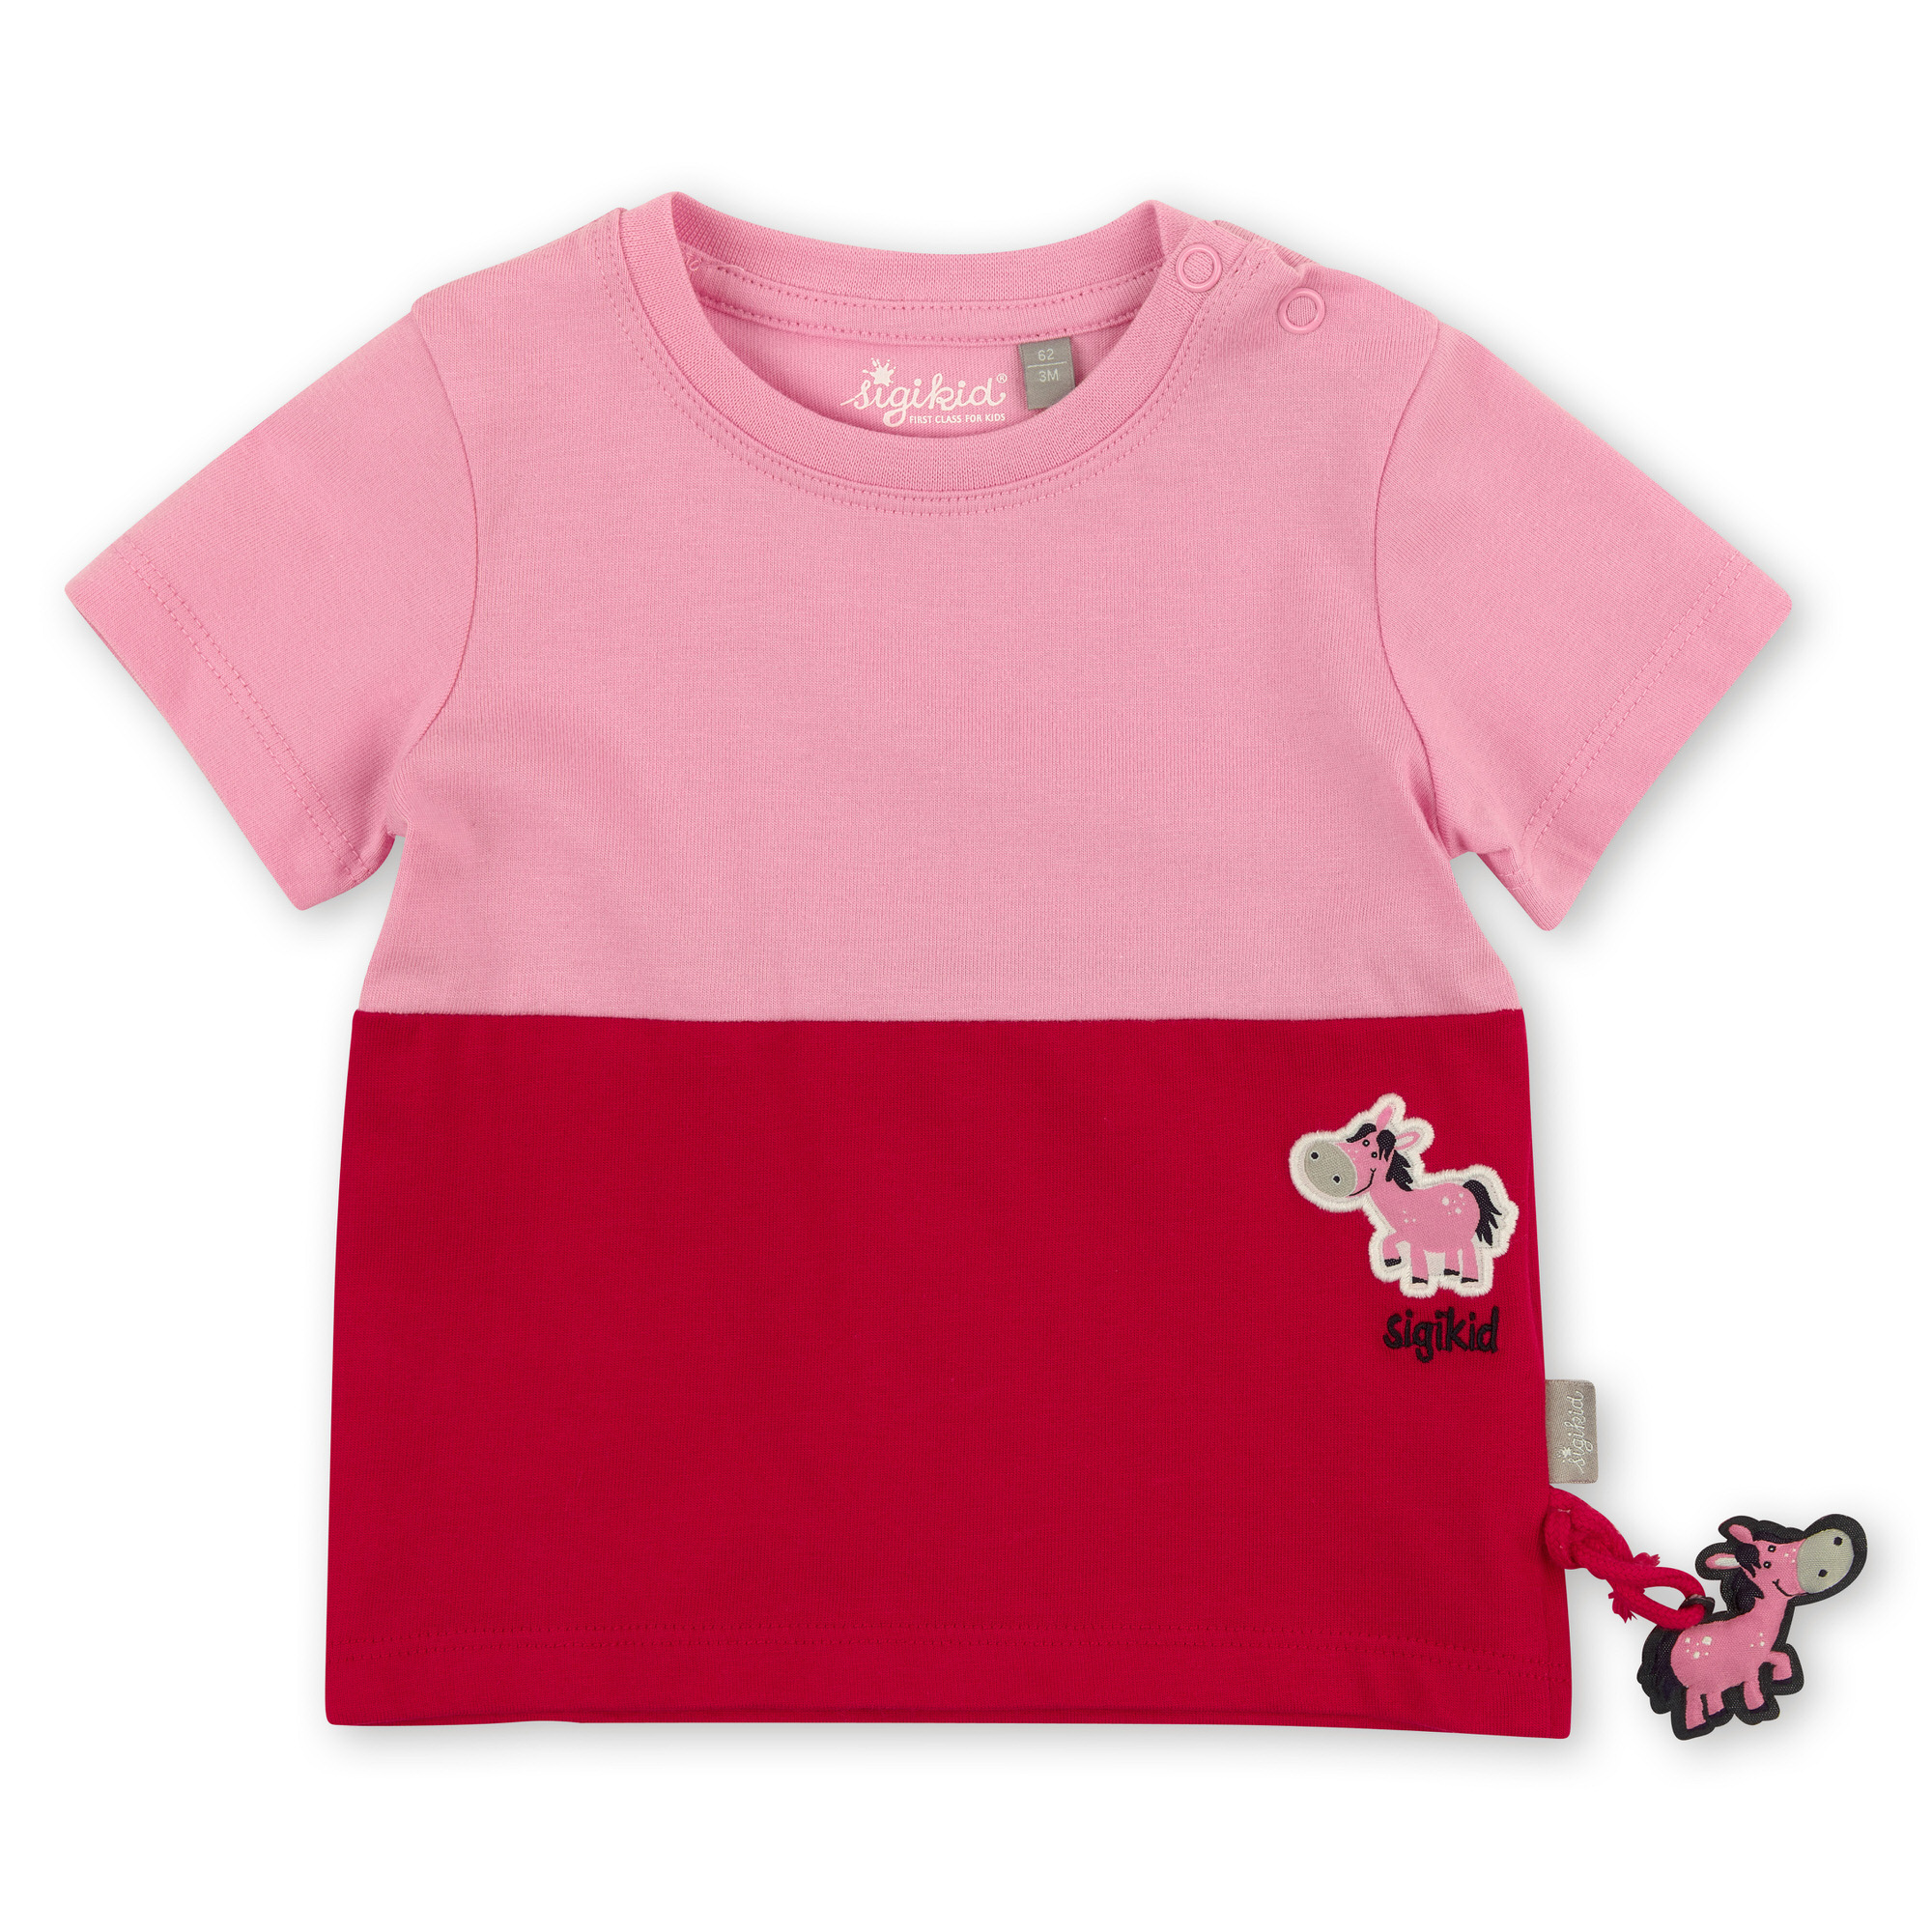 Rose red T-shirt for baby and toddler girls